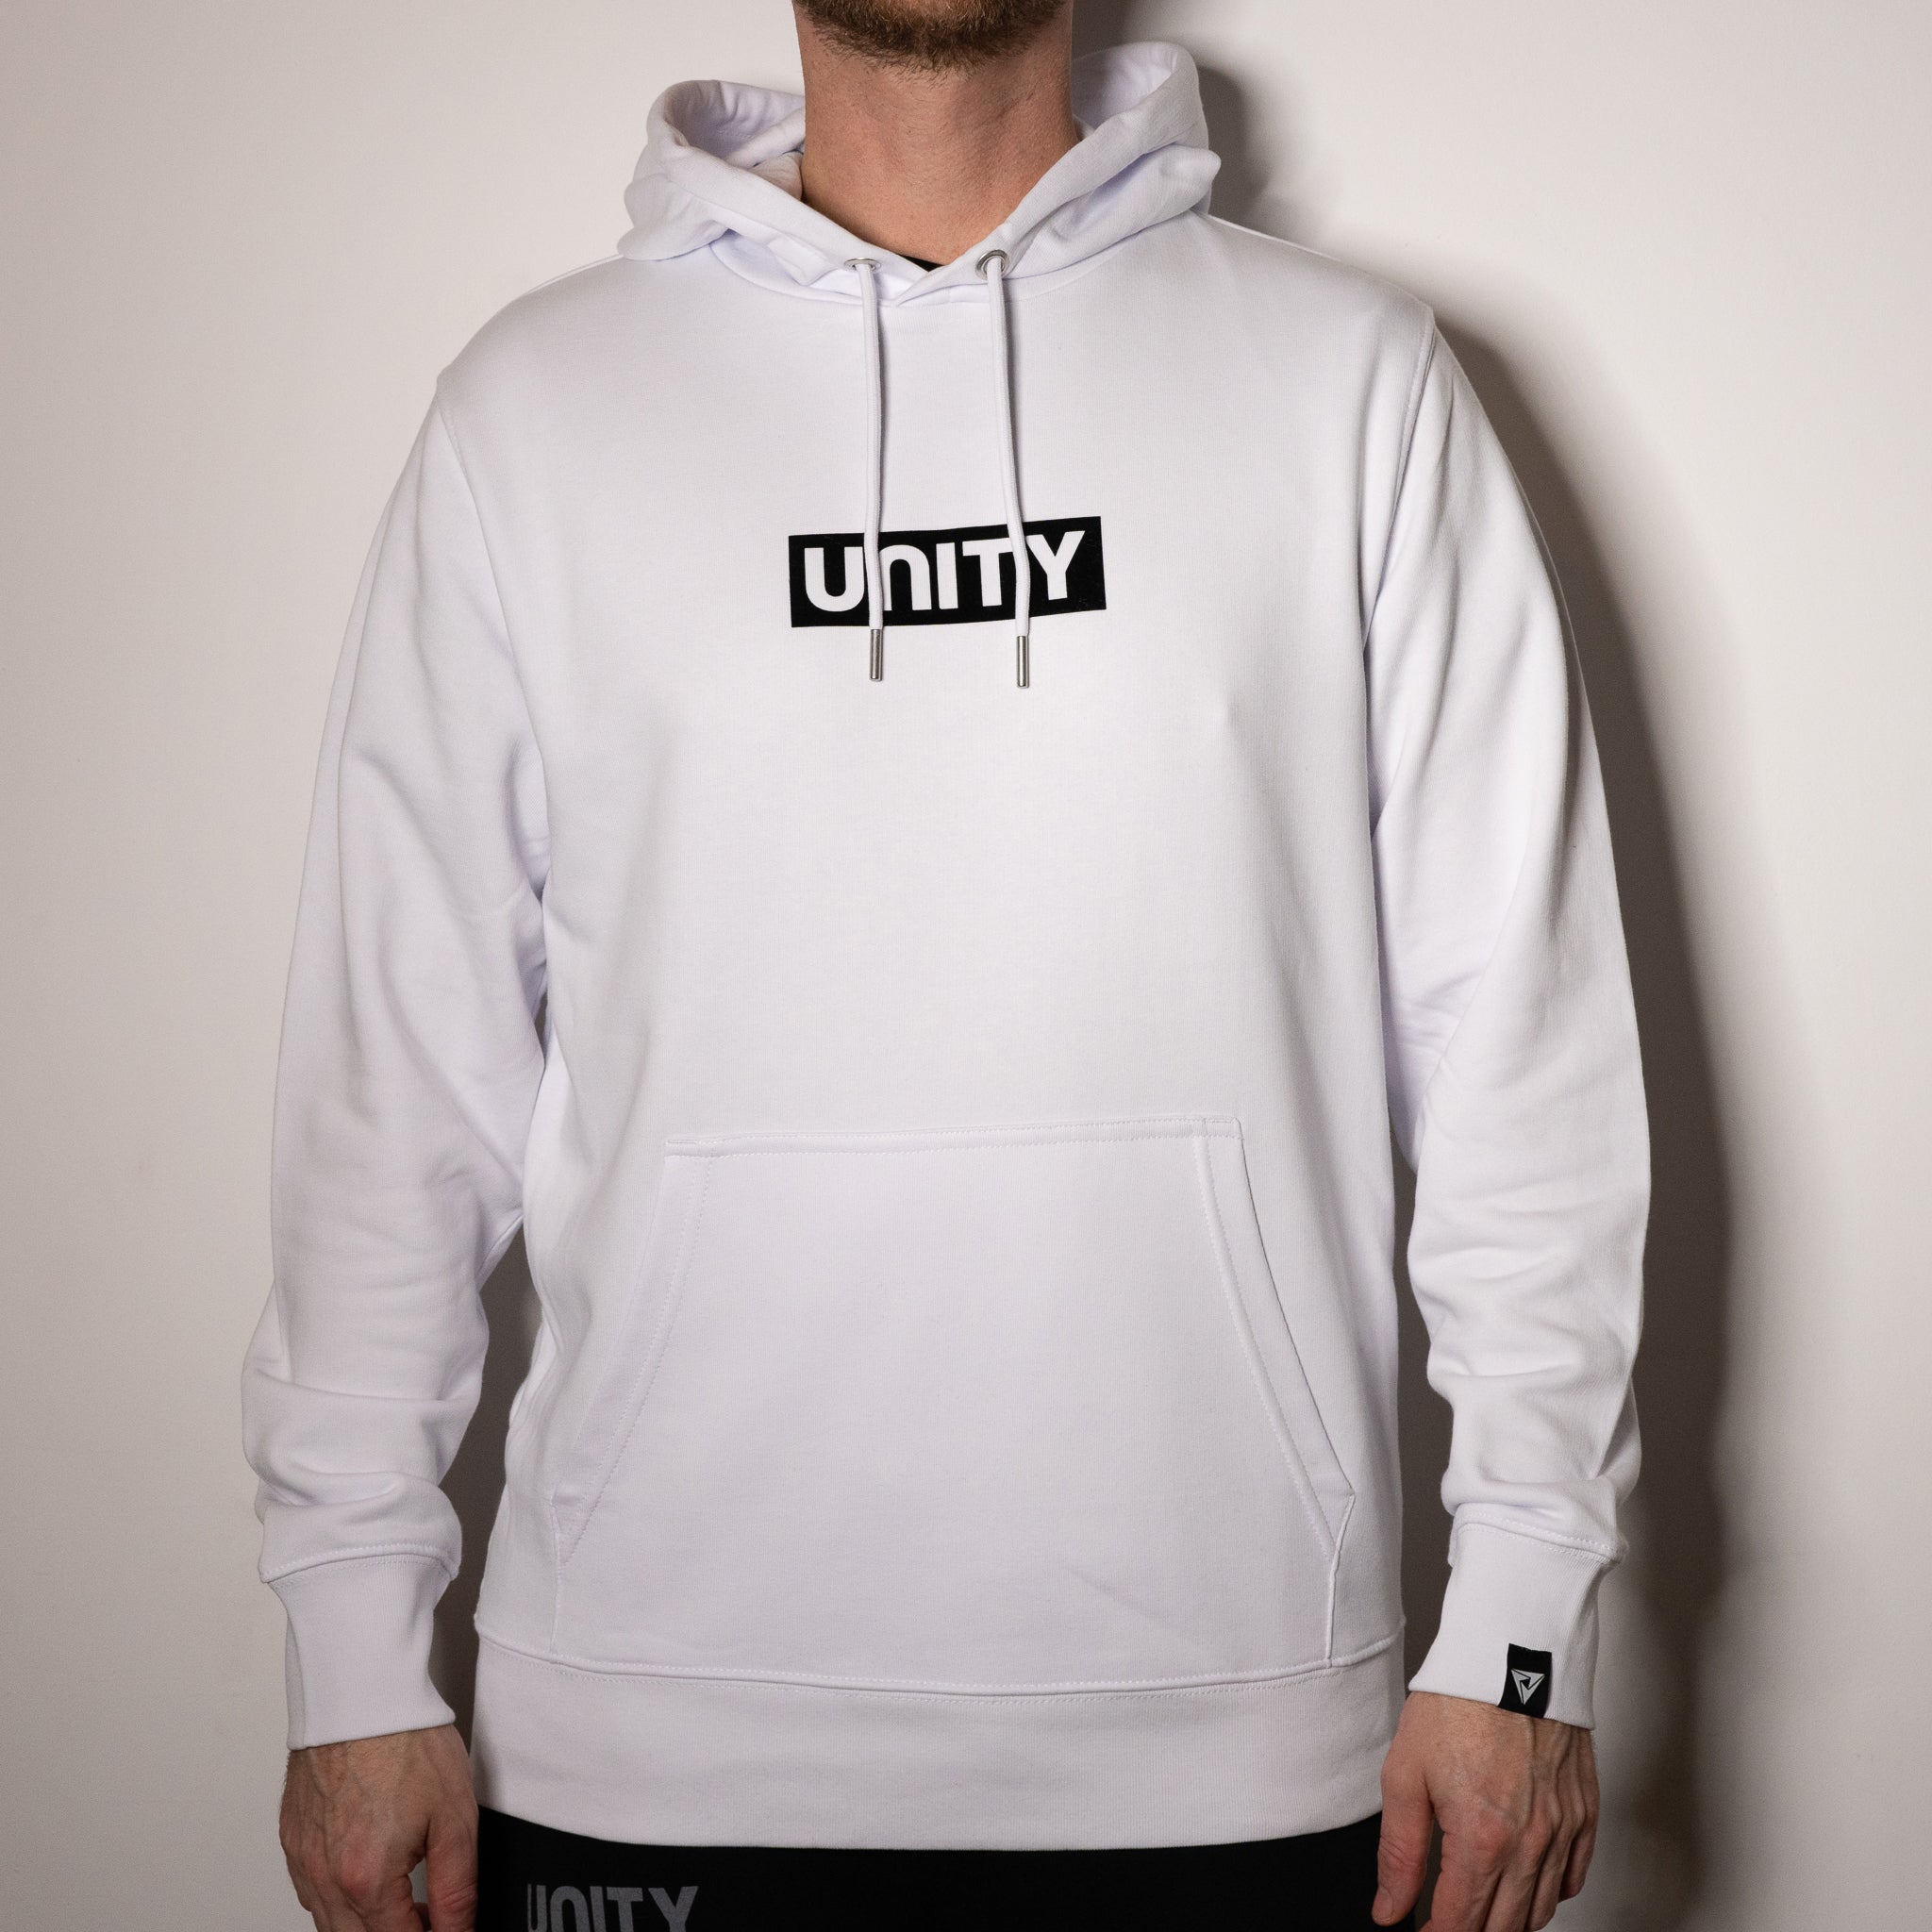 White Canberra Hoodie - Unity